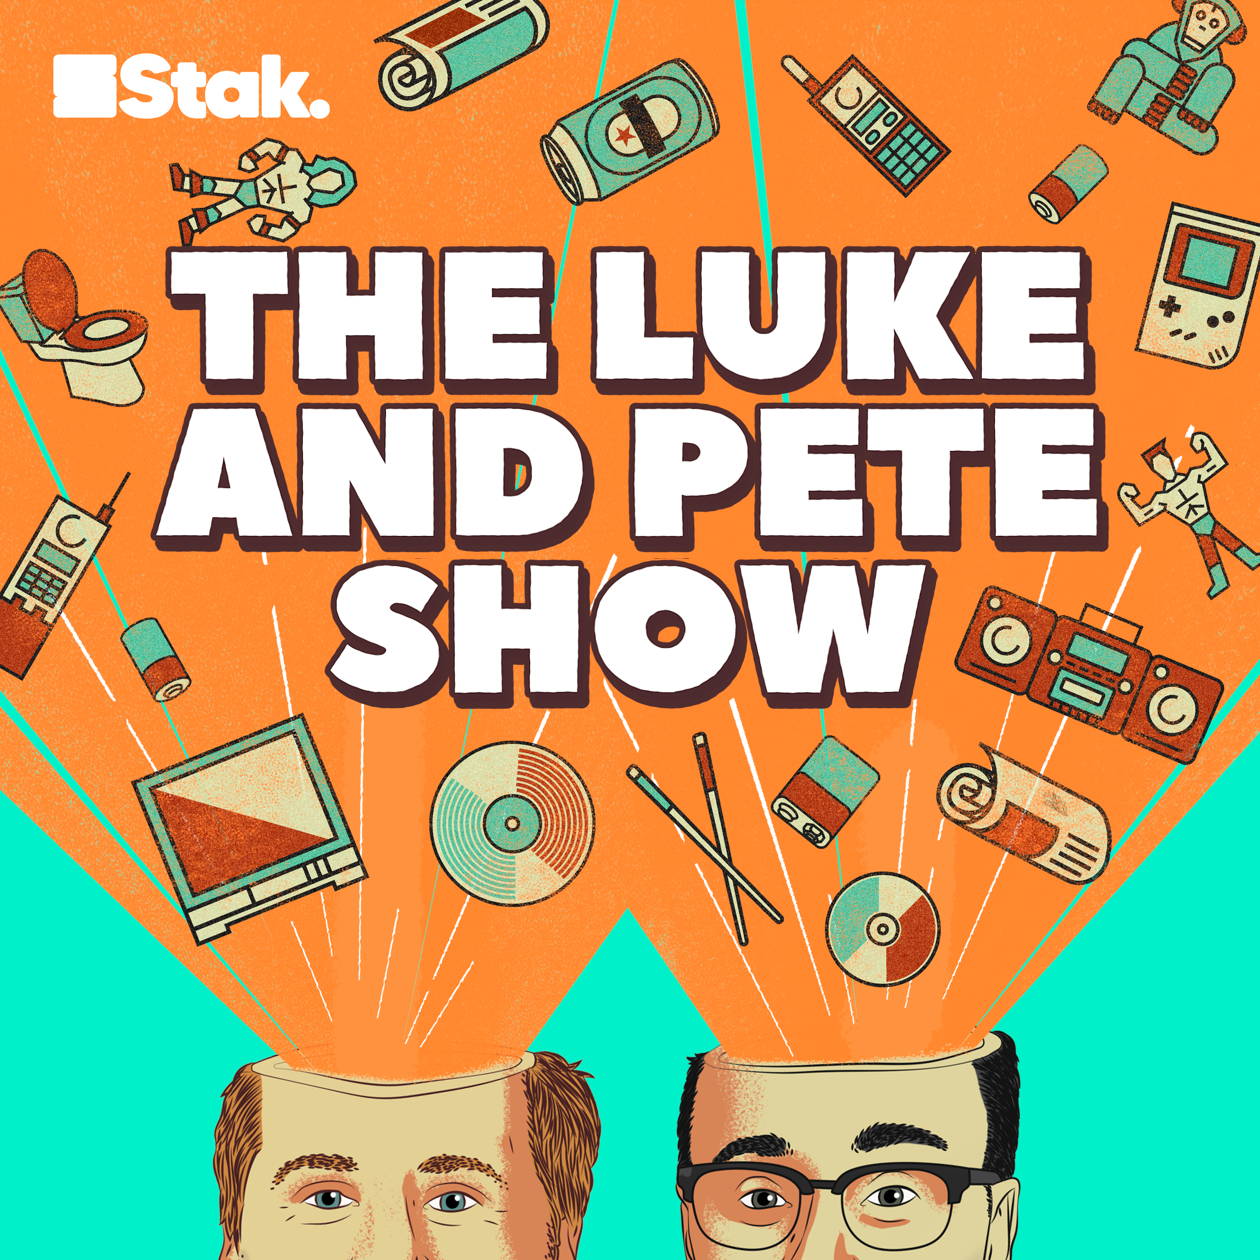 Artwork for the The Luke and Pete Show podcast.